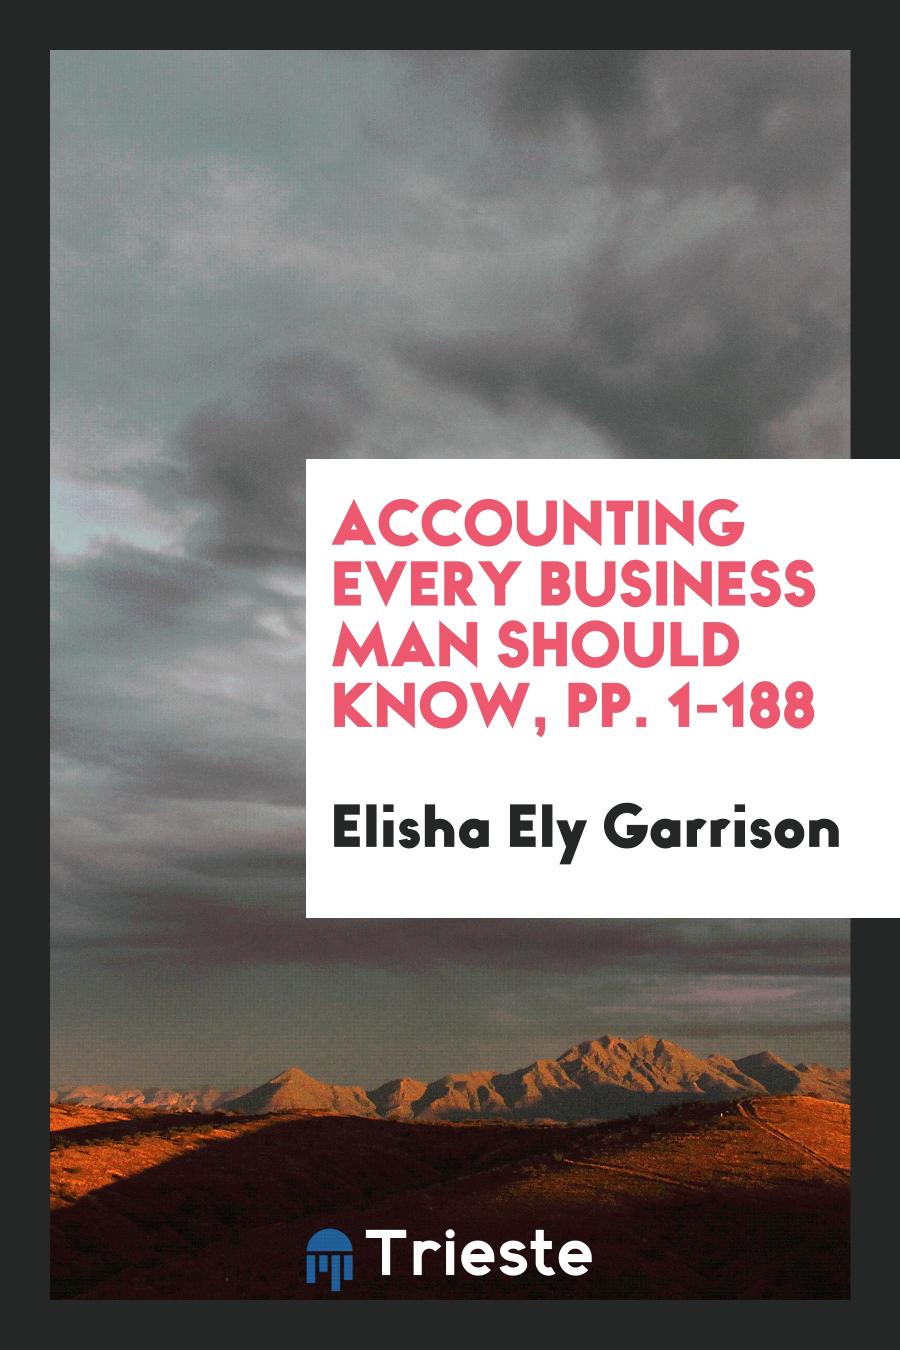 Accounting Every Business Man Should Know, pp. 1-188